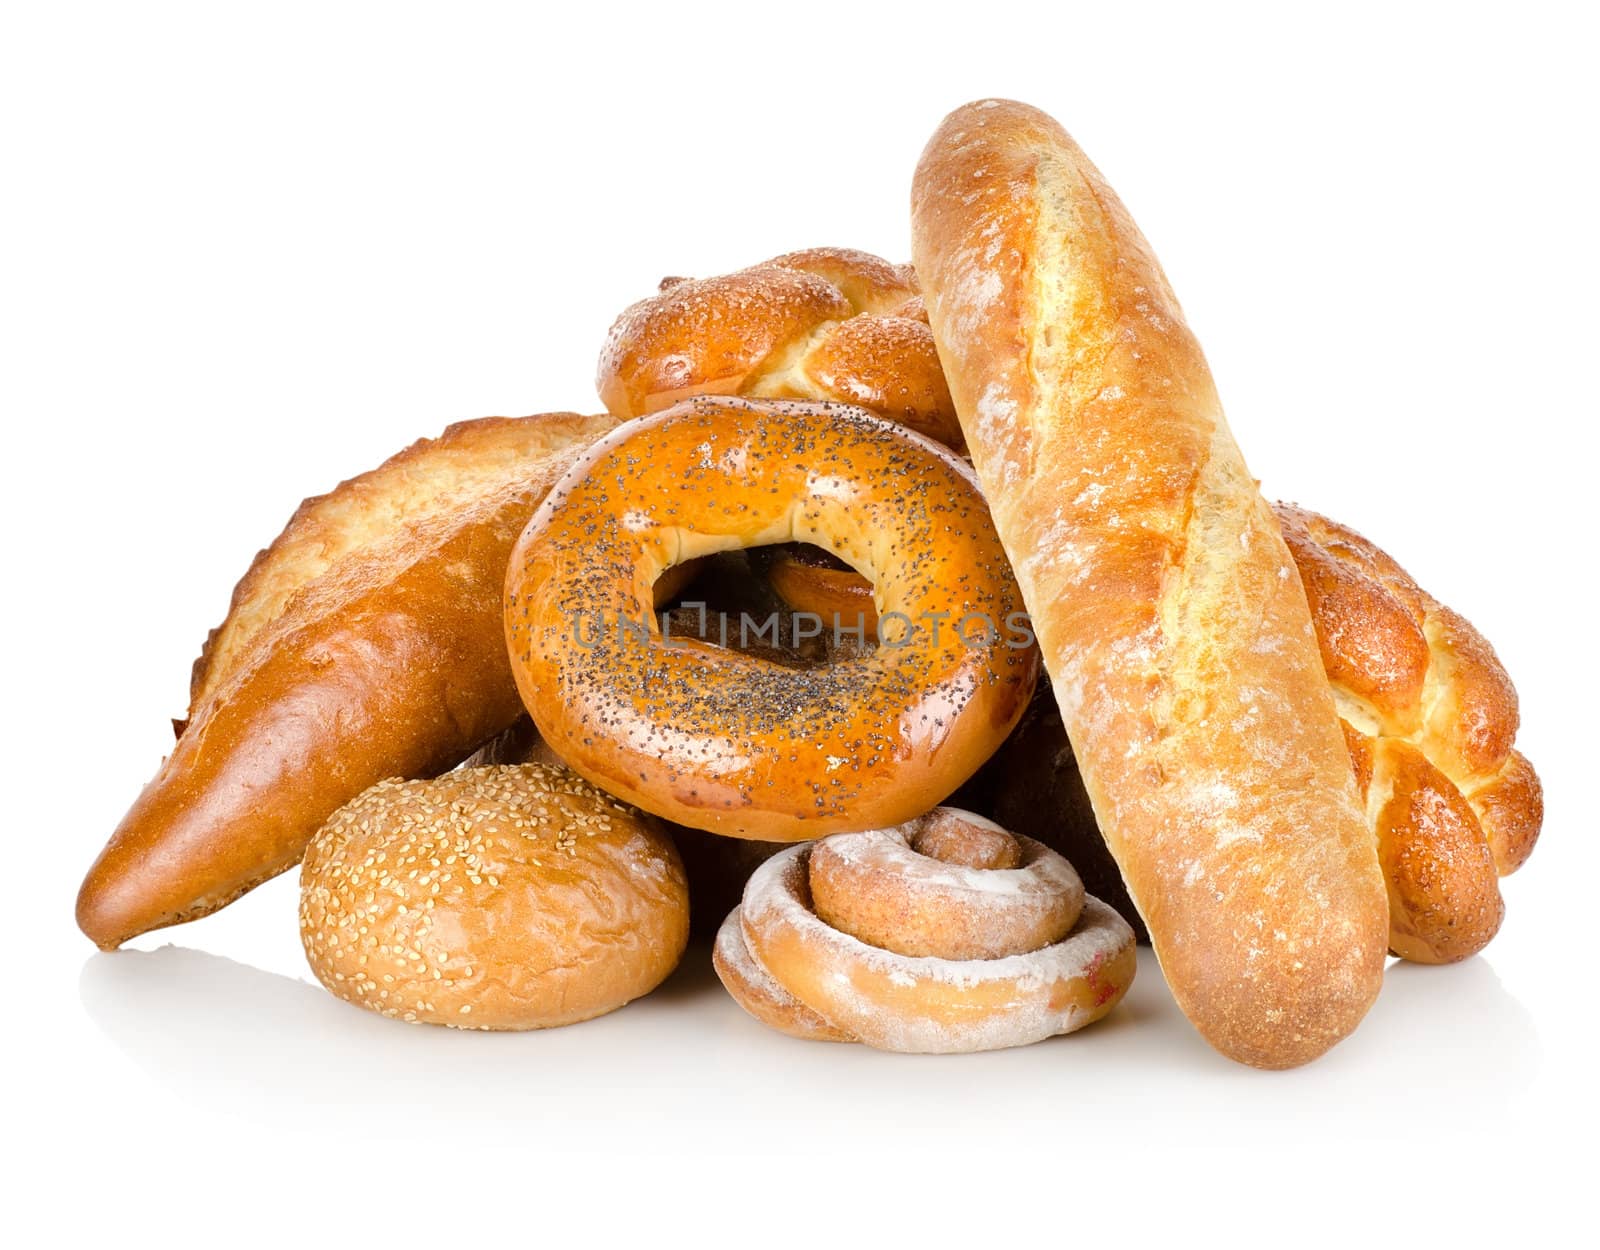 Collection of different breads by Givaga